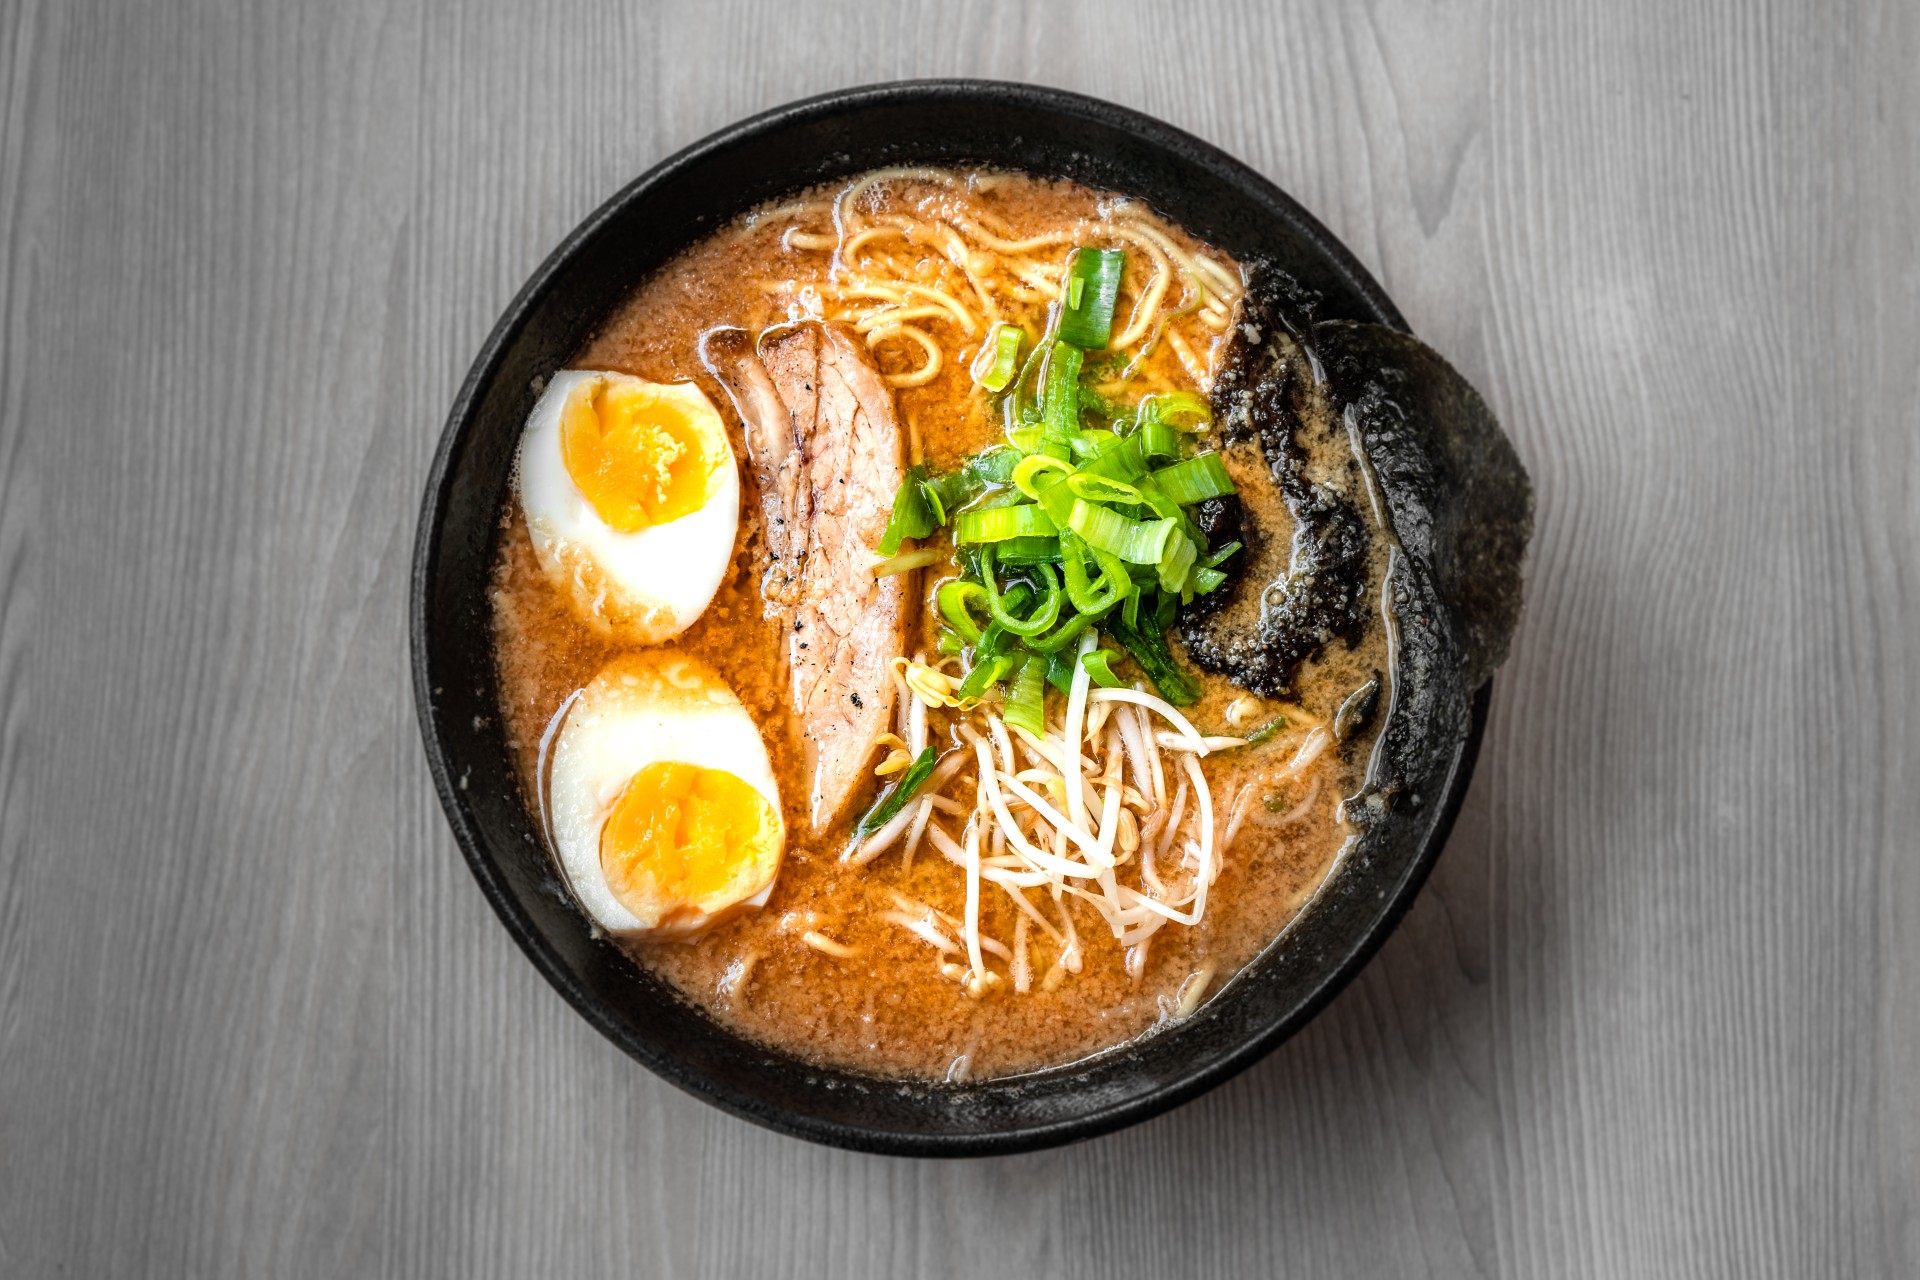 Anticipated new ramen concept opening next month in Grandview area - 614NOW